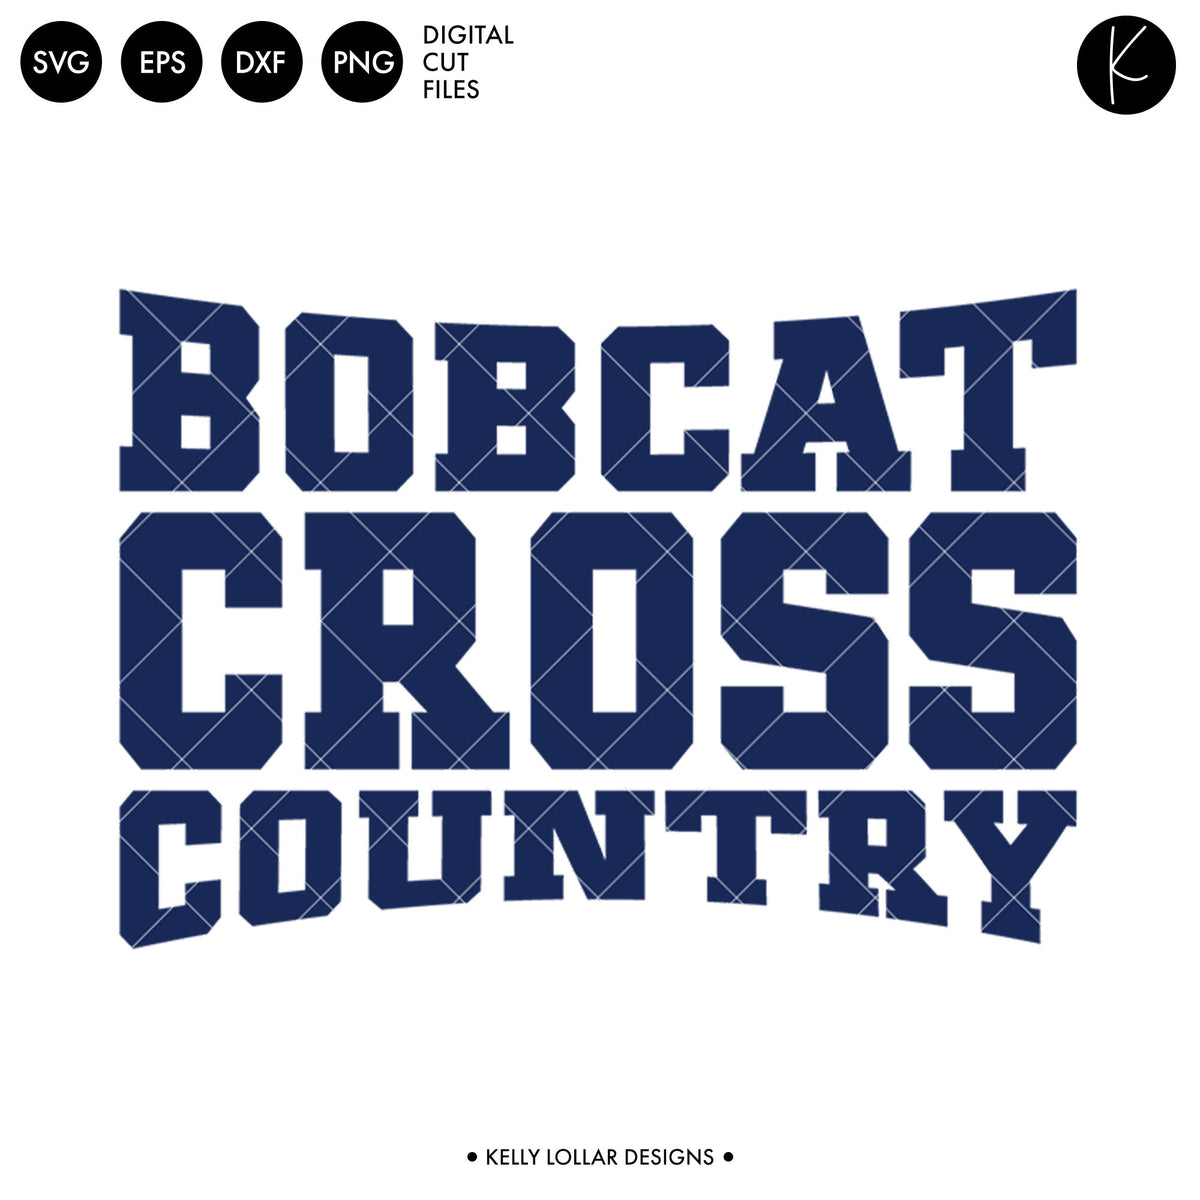 Bobcats Cross Country Bundle | SVG DXF EPS PNG Cut Files